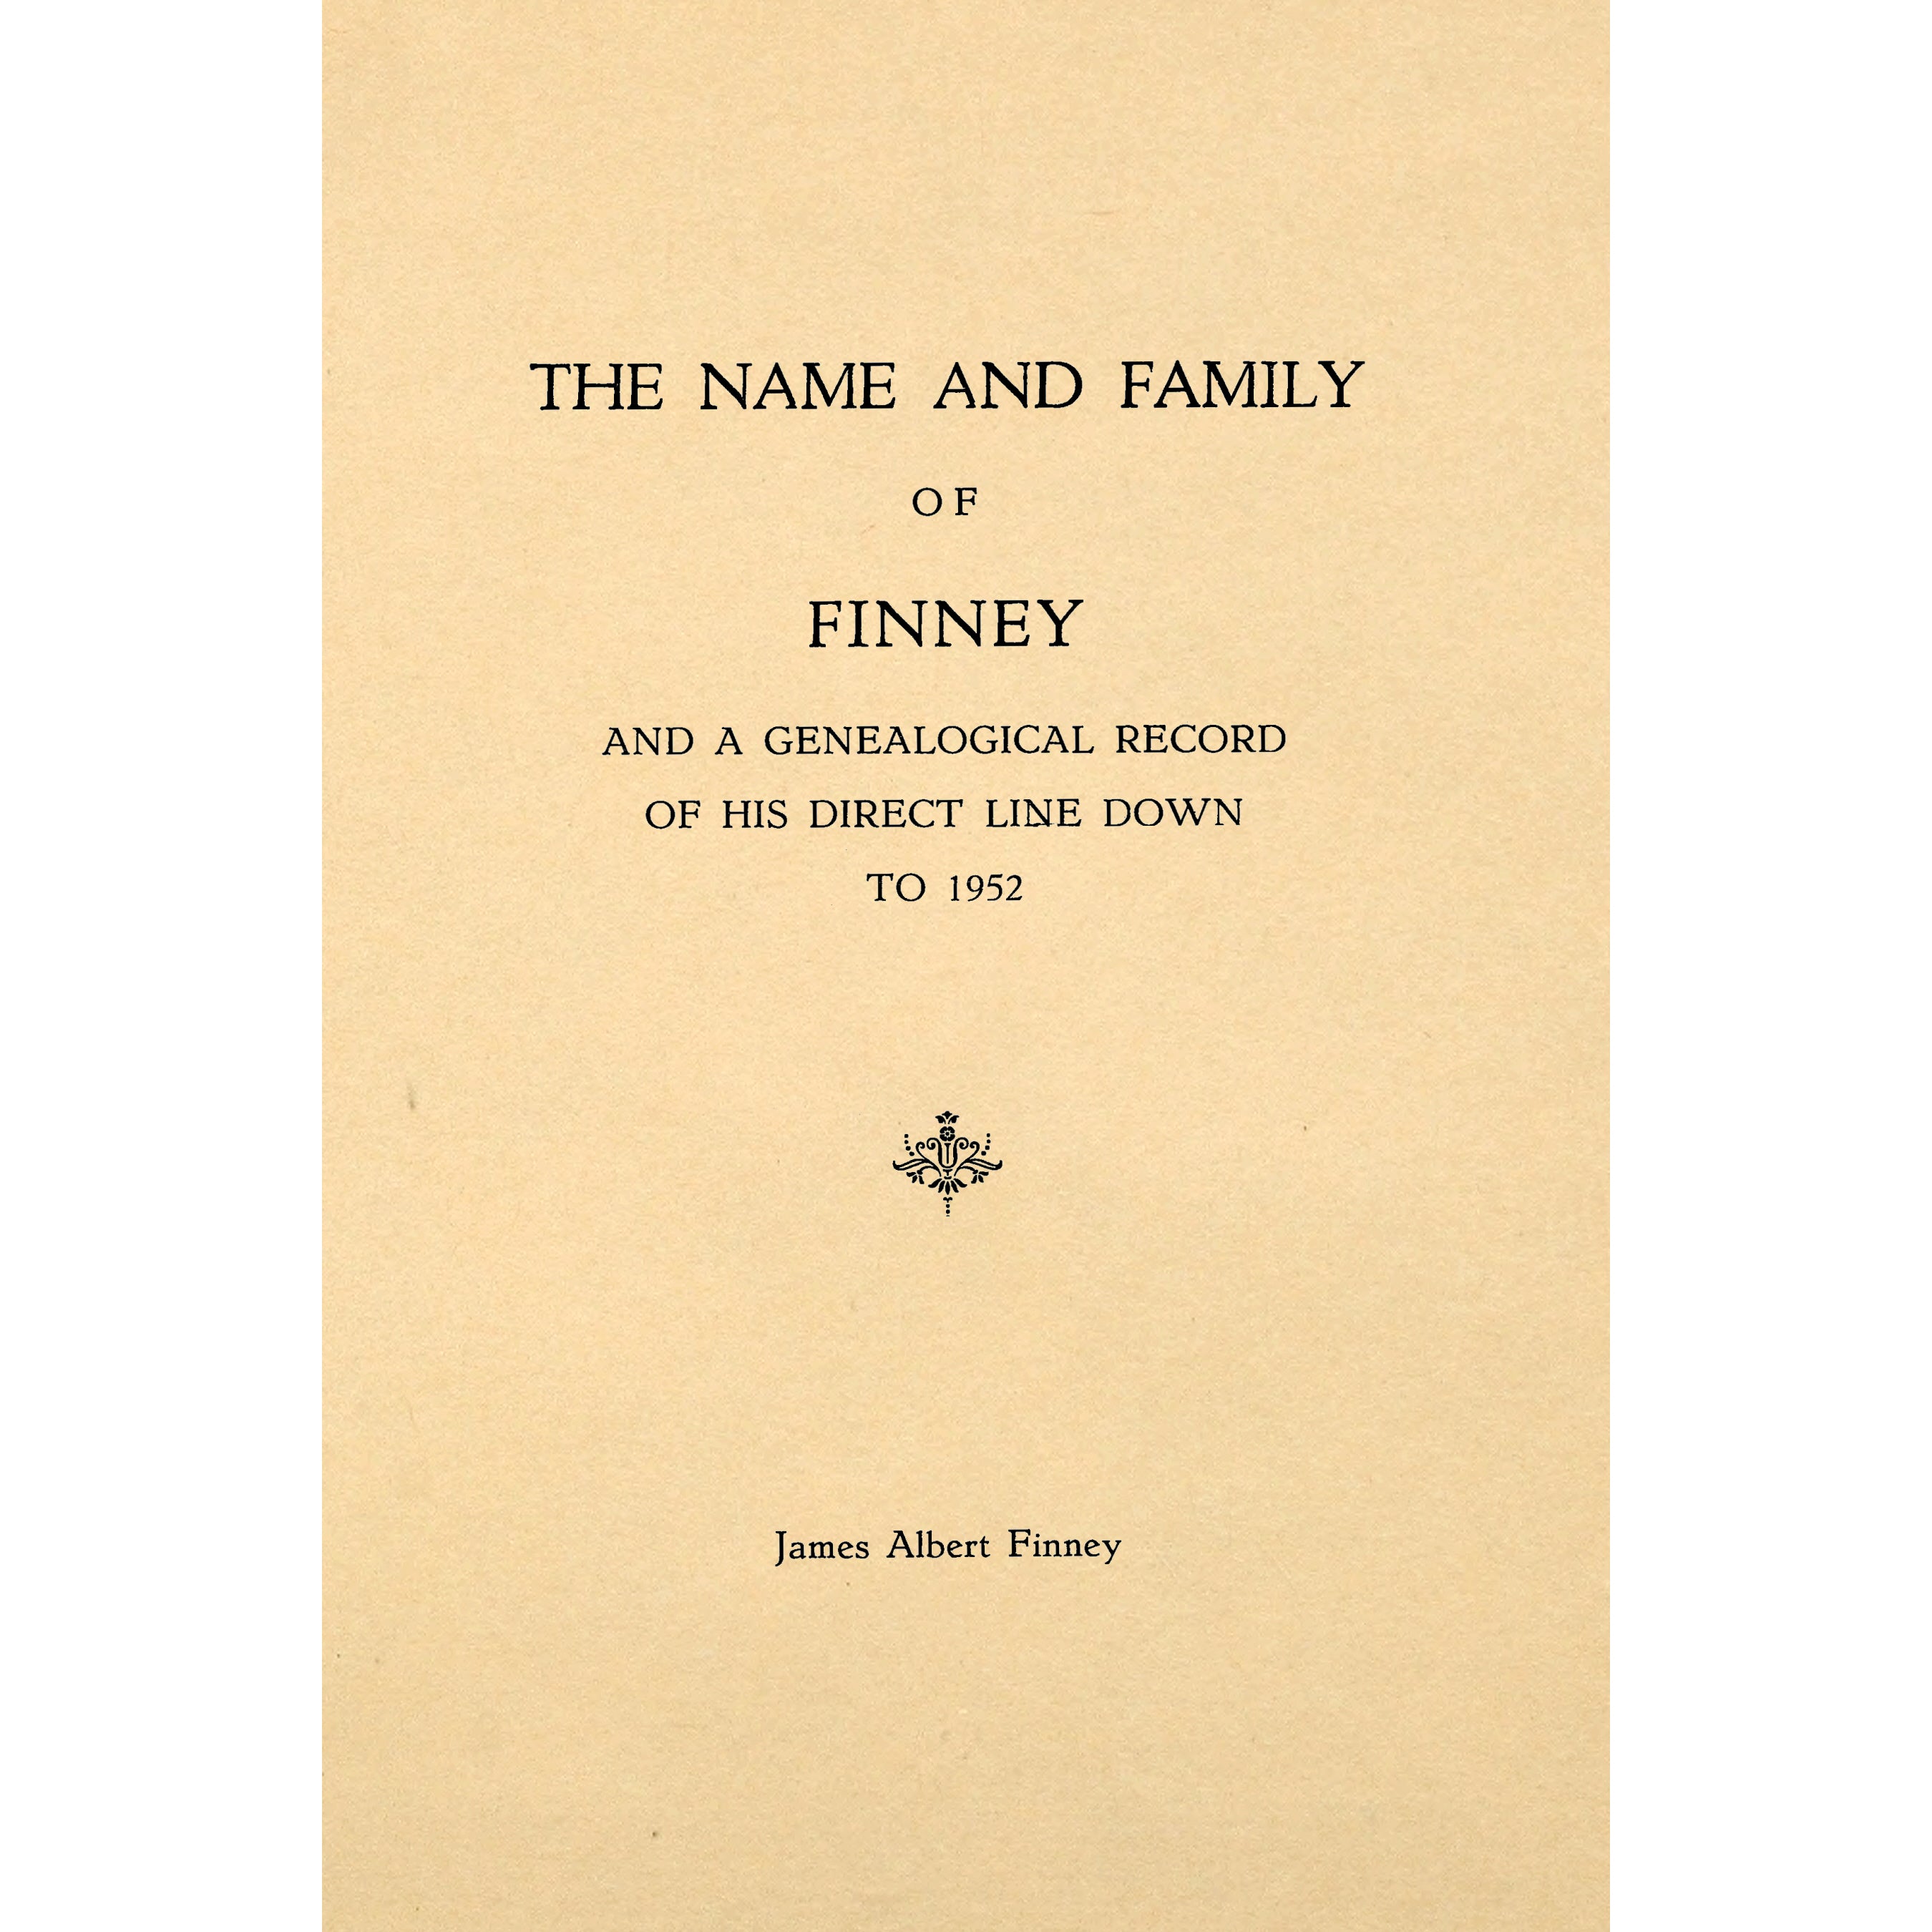 The Name and Family of Finney and a Genealogical Record of His Direct Line Down to 1952